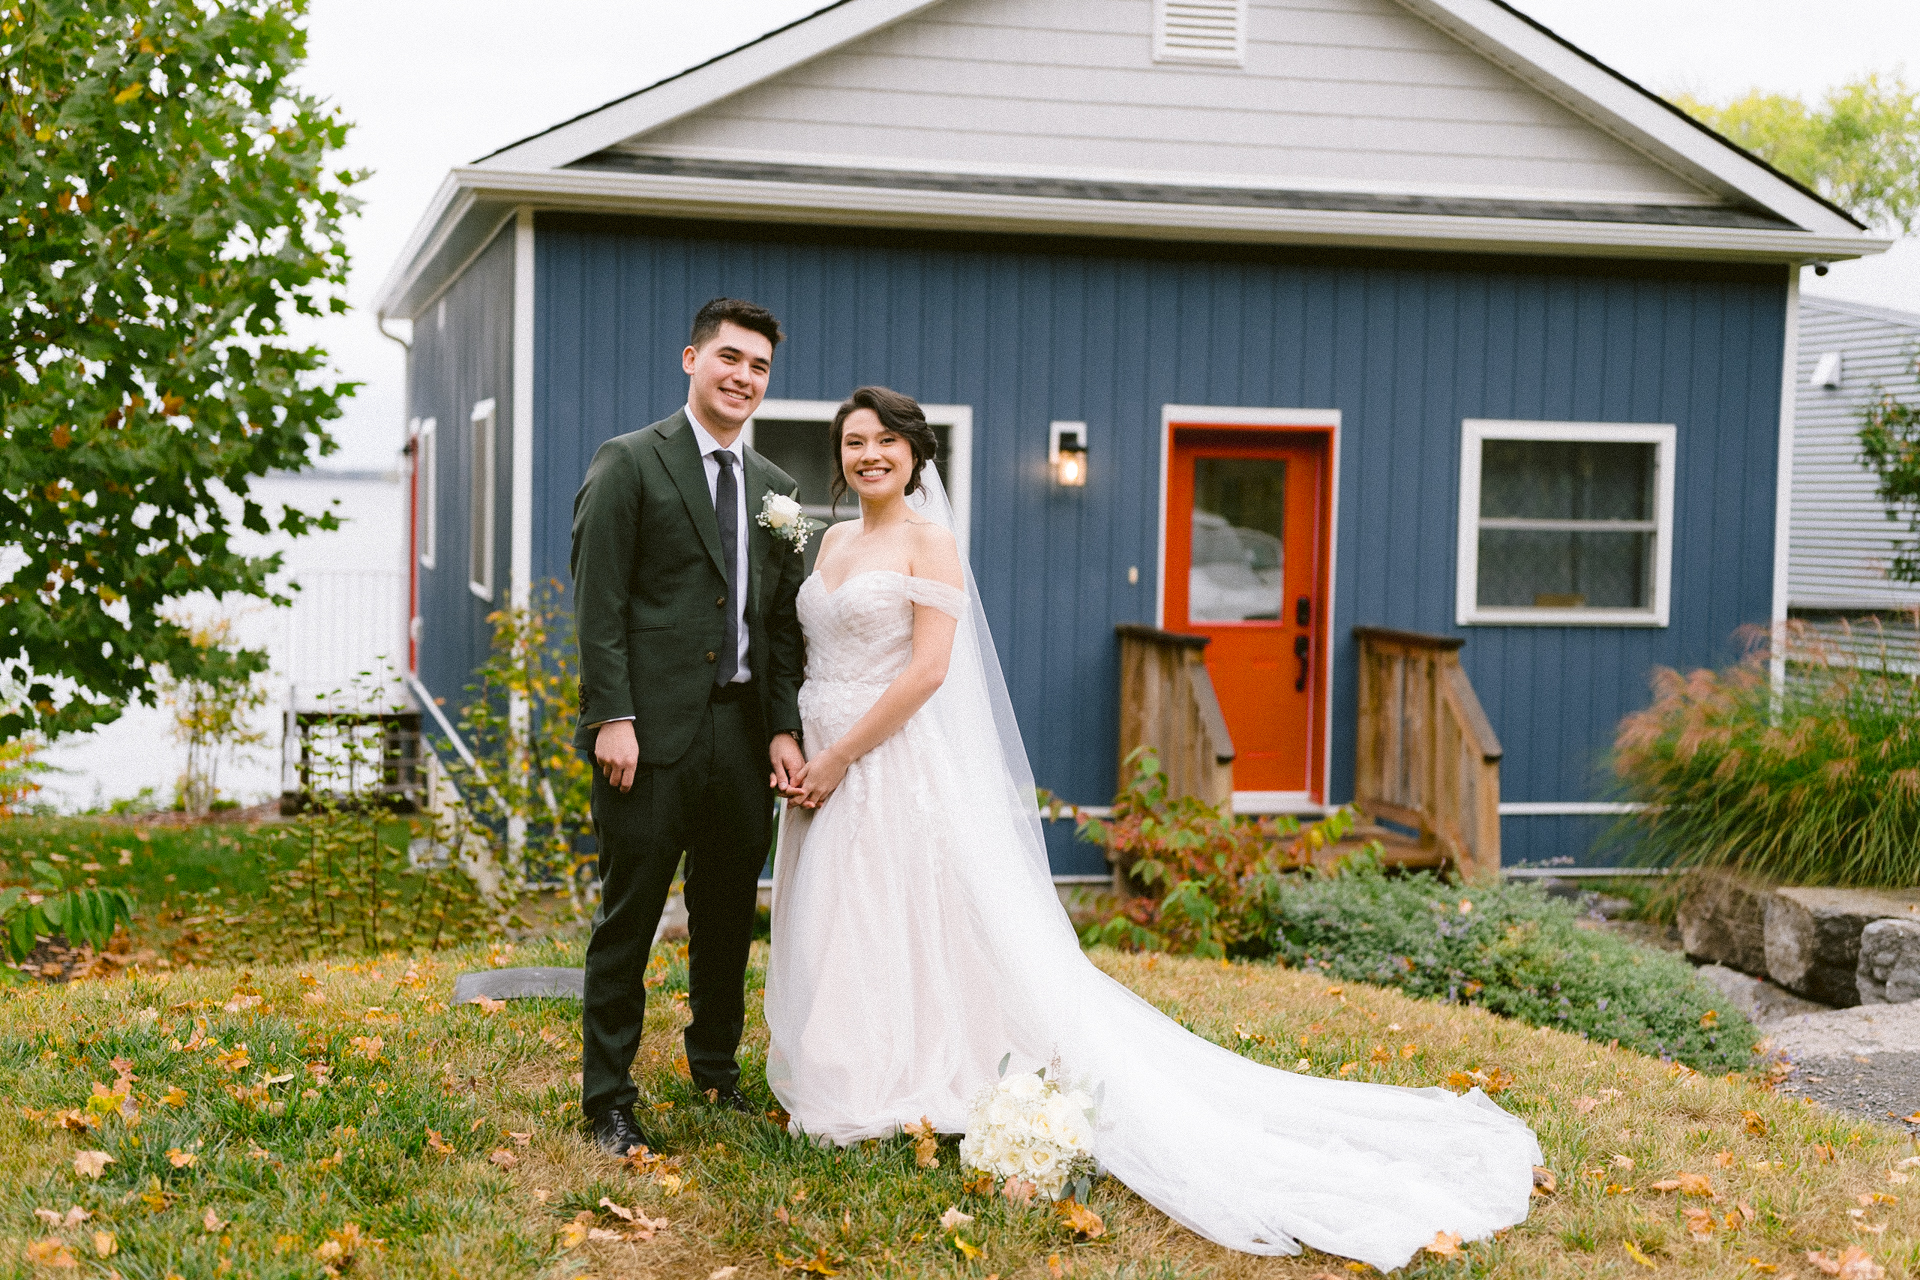 A smiling couple in wedding attire posing in front of a blue house with a red door